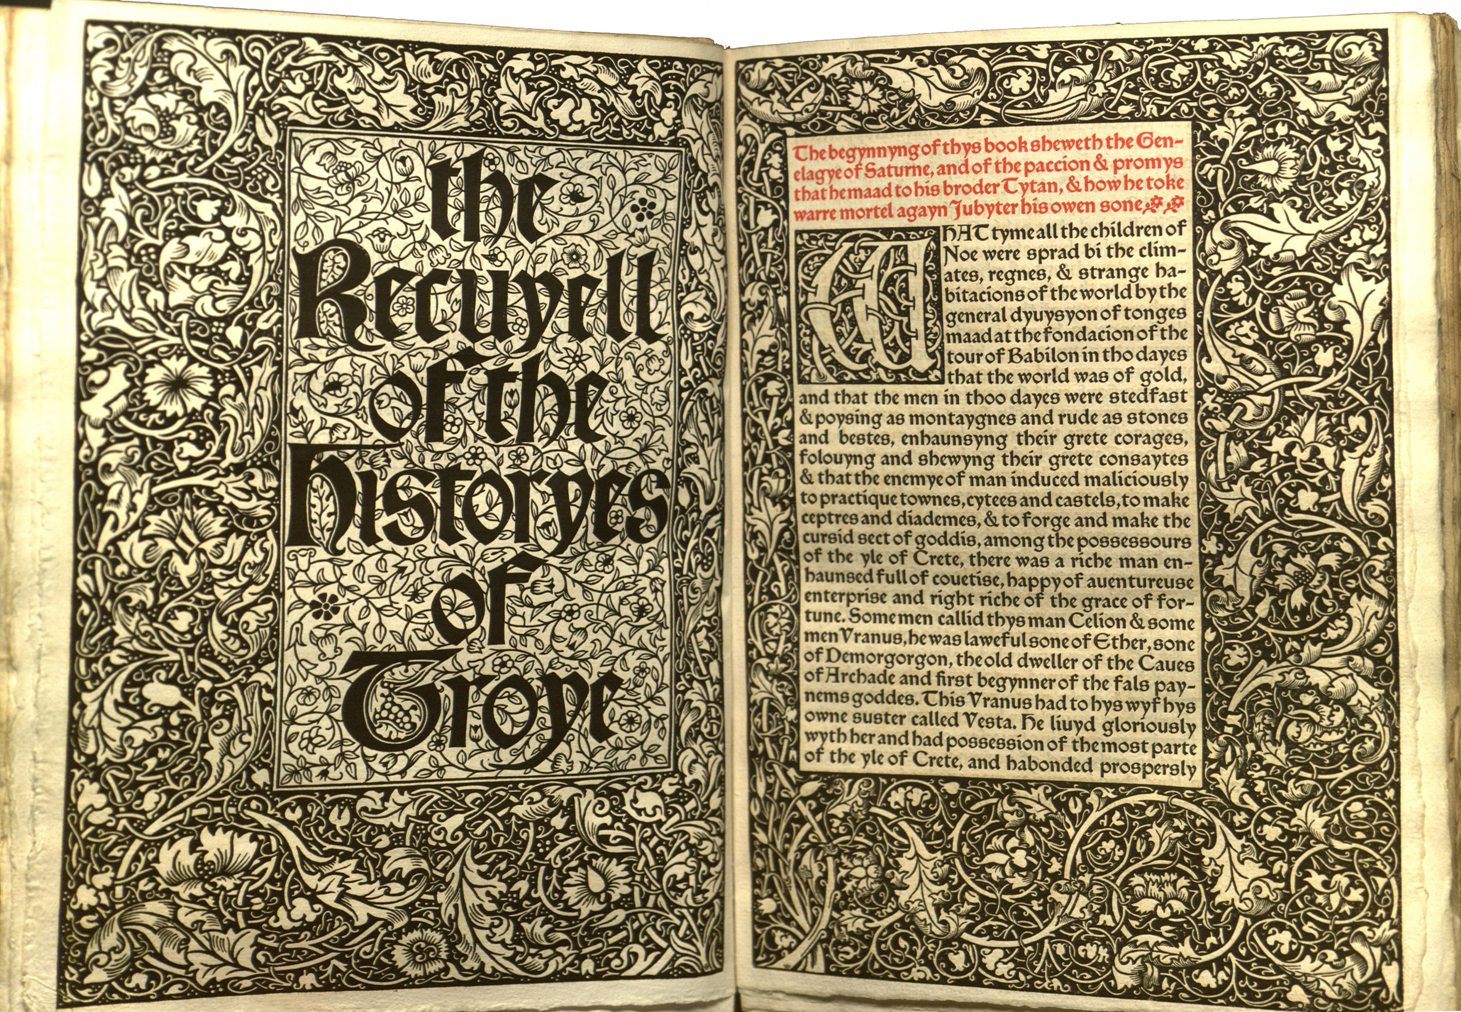 Two-page spread with title page of The Recuyell of the Historyes of Troye with ornamental decorative elements covering the page. 